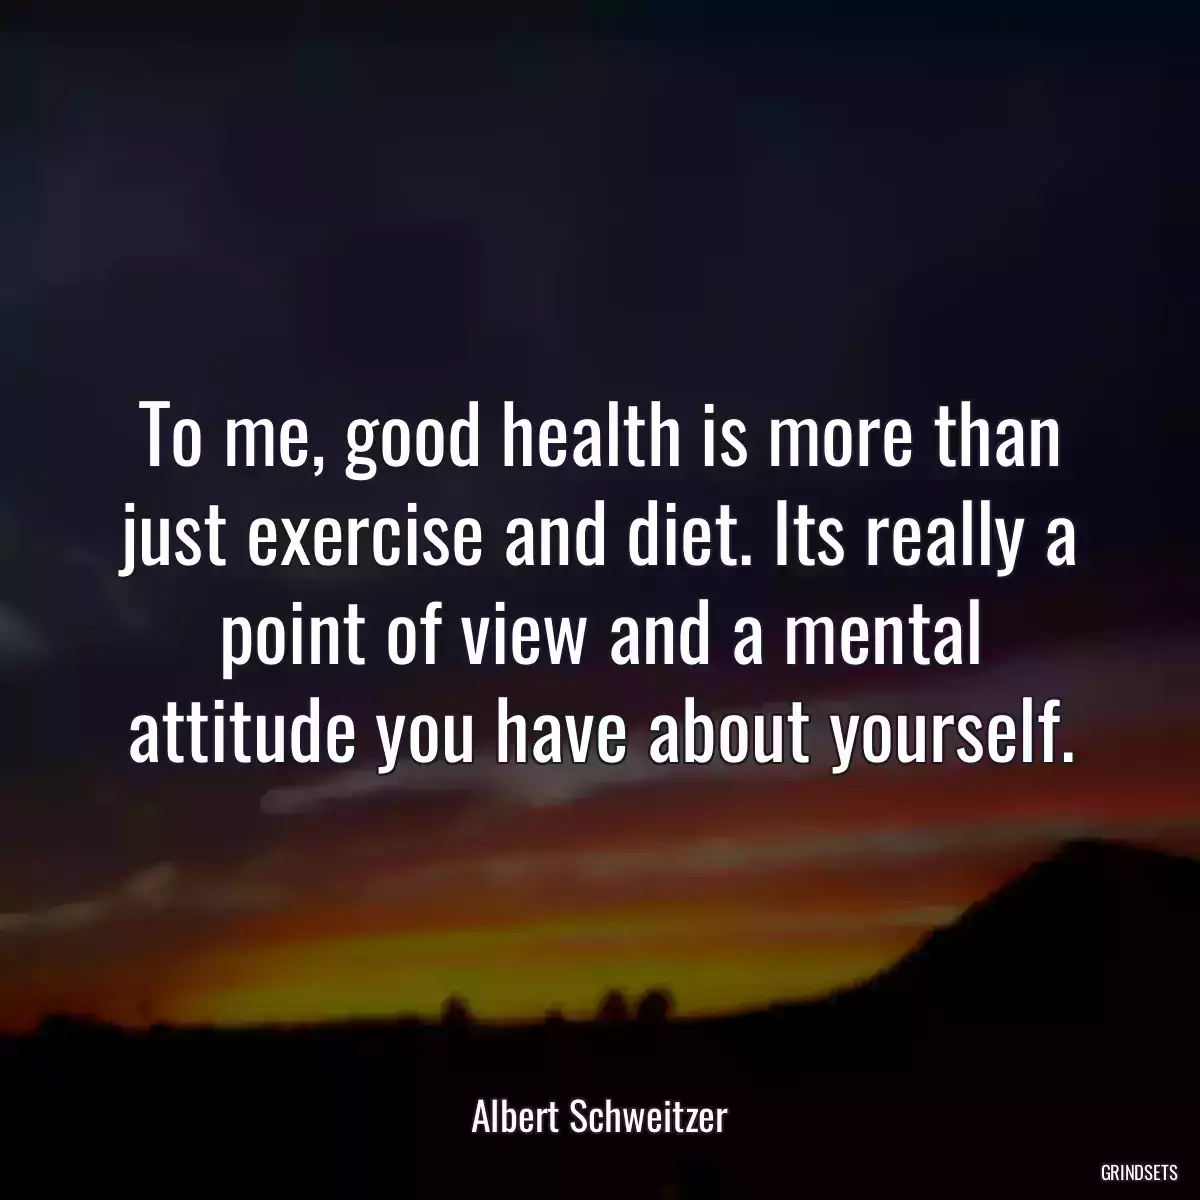 To me, good health is more than just exercise and diet. Its really a point of view and a mental attitude you have about yourself.